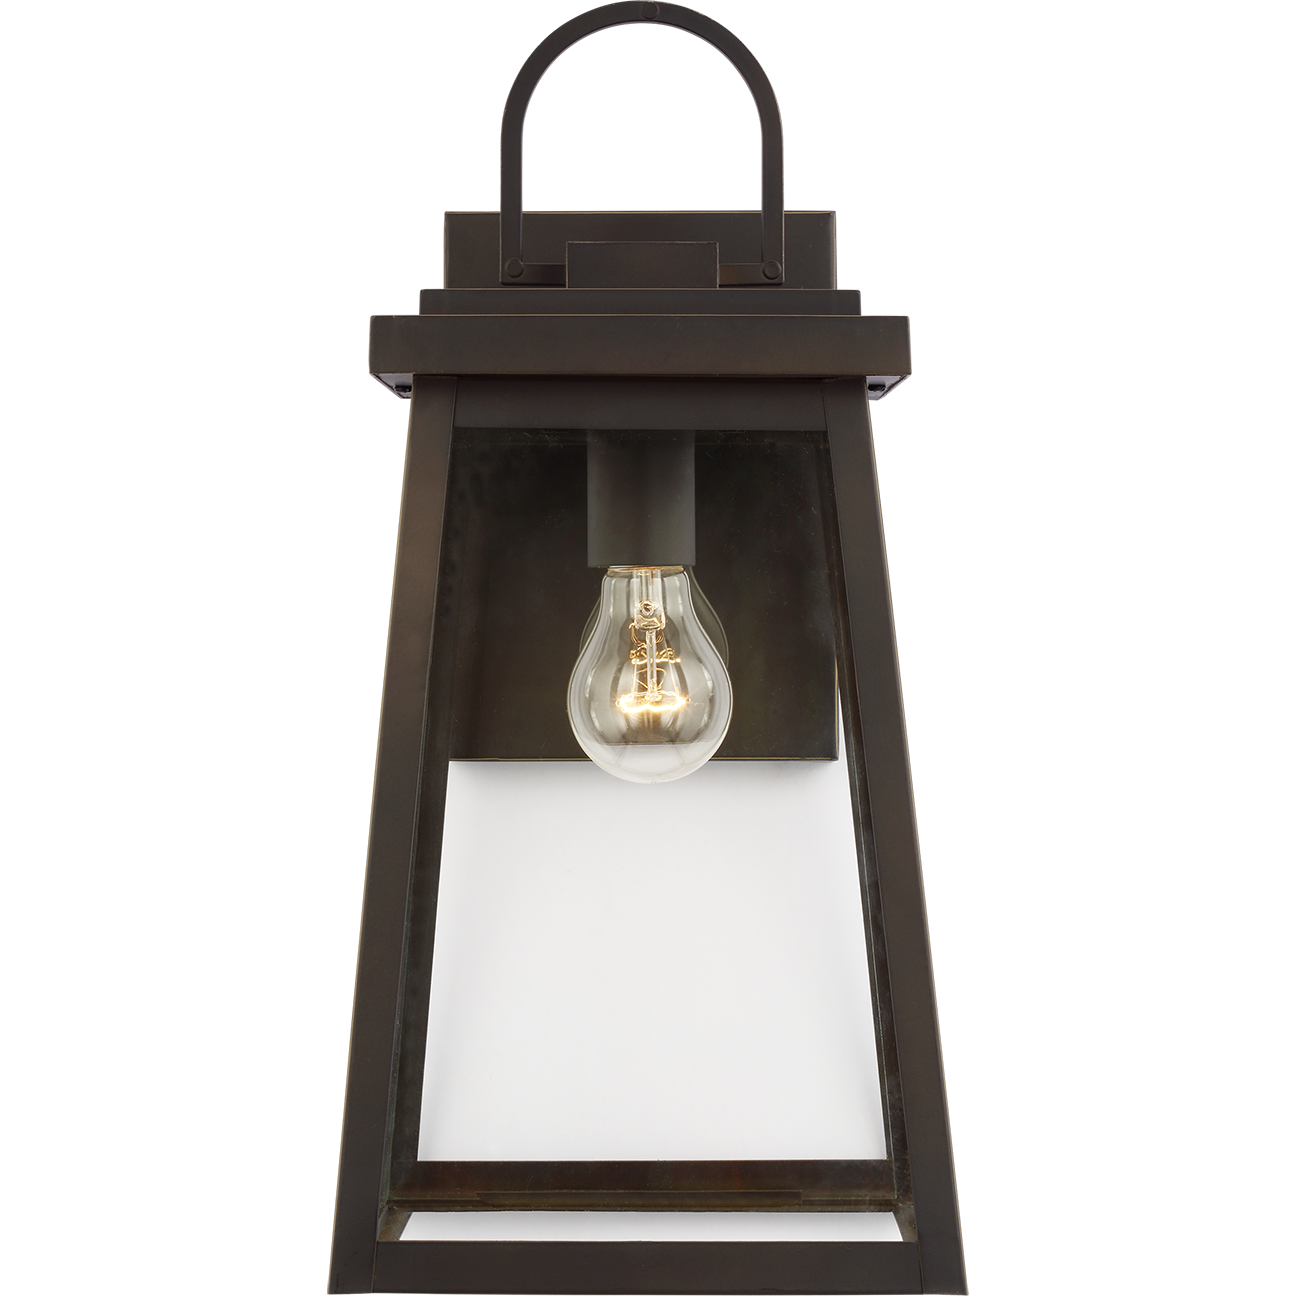 Founders Large One Light Outdoor Wall Lantern